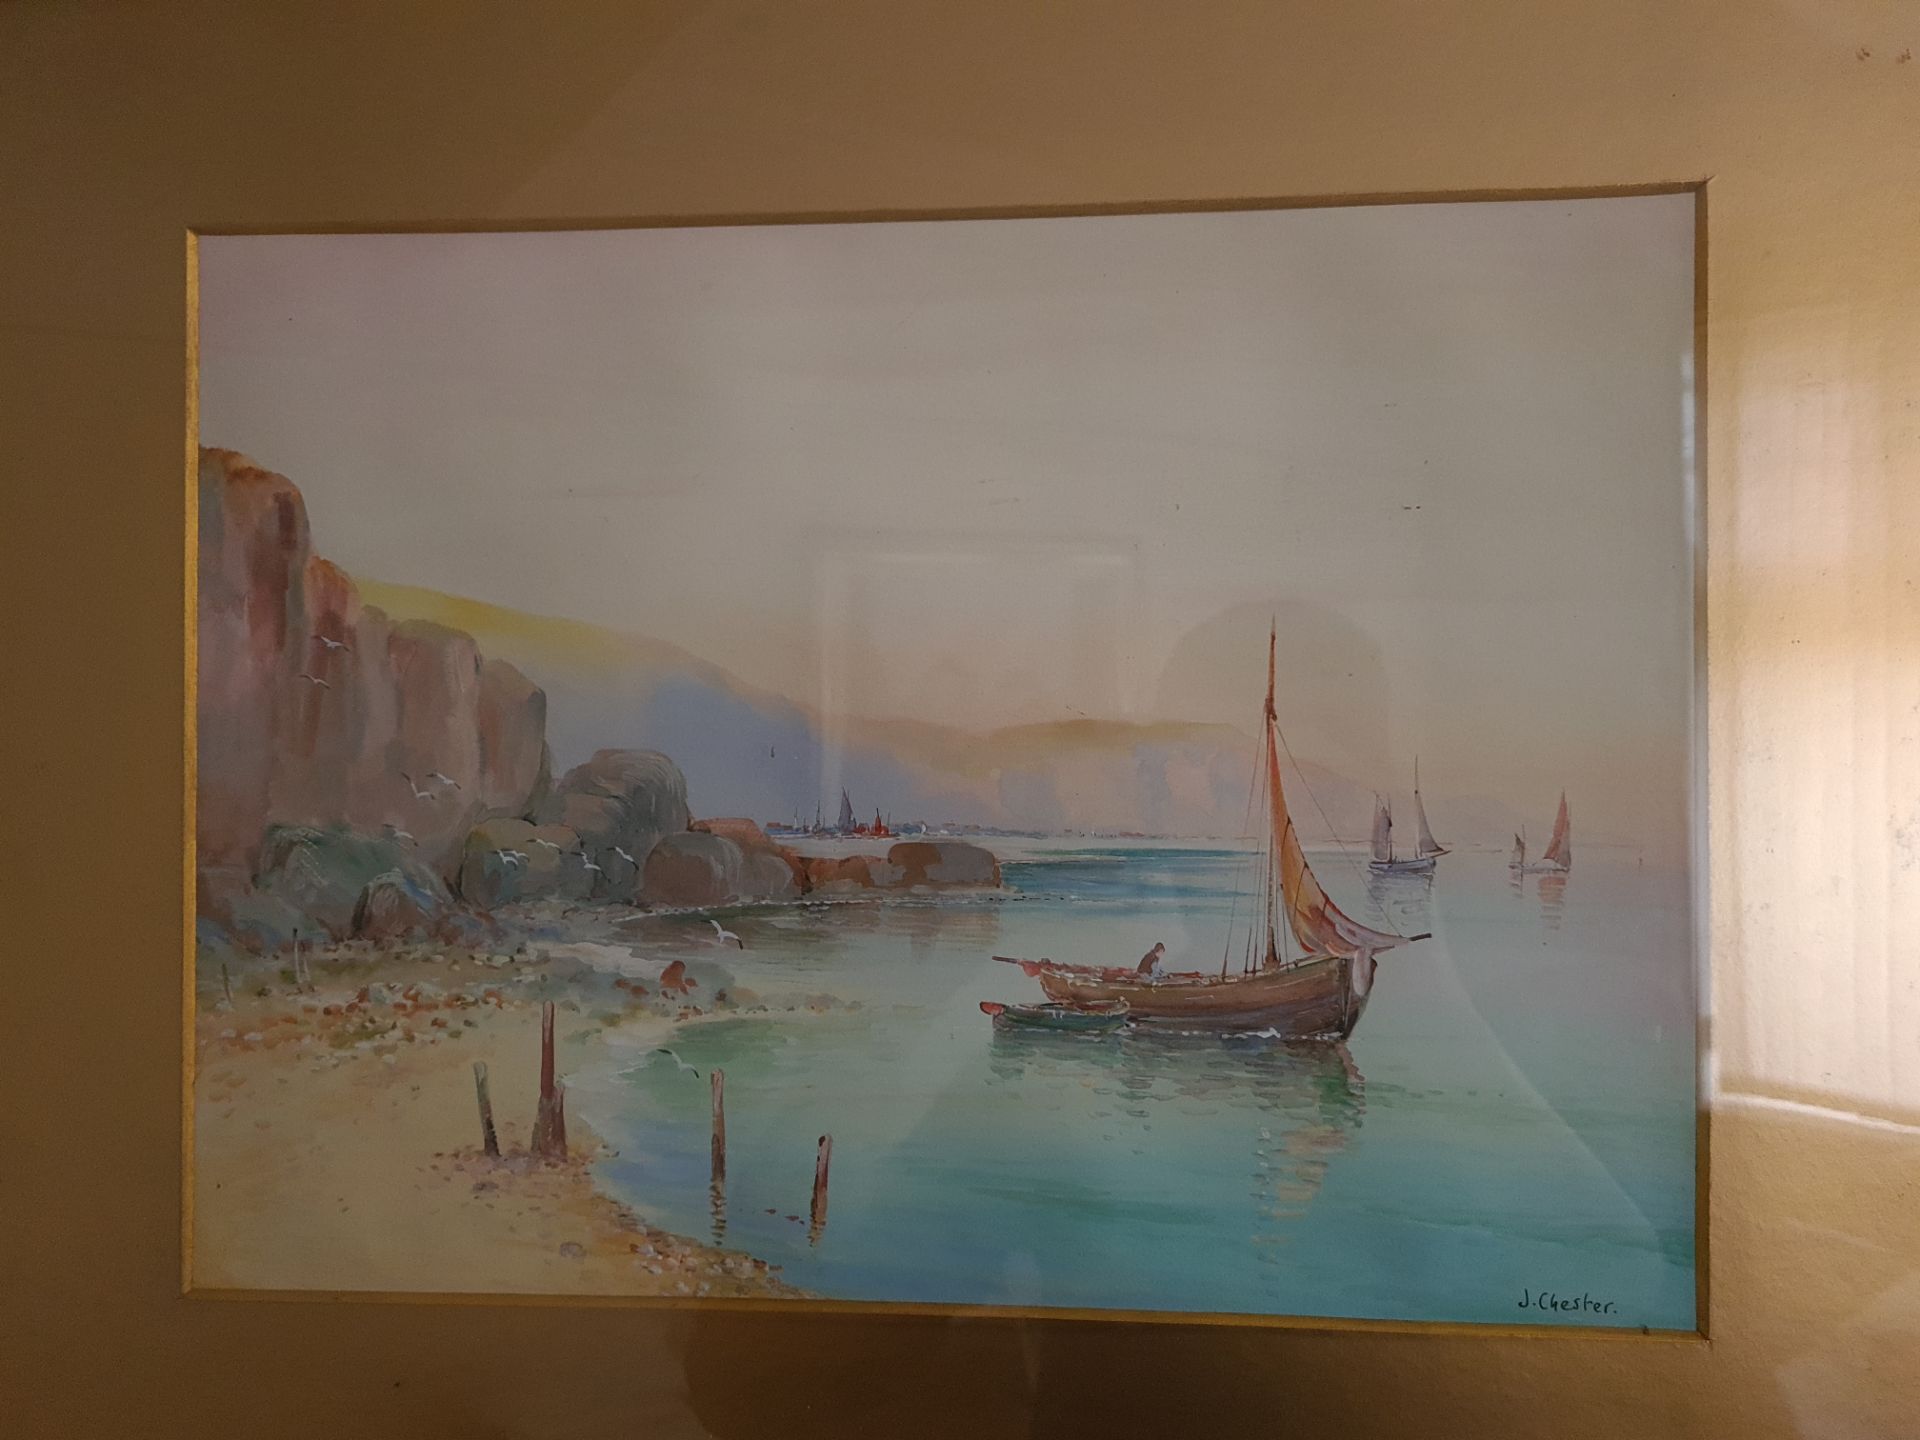 Signed Framed Watercolour Sailing Boat Scene by J chester, 55cm x 45cm - Image 2 of 3